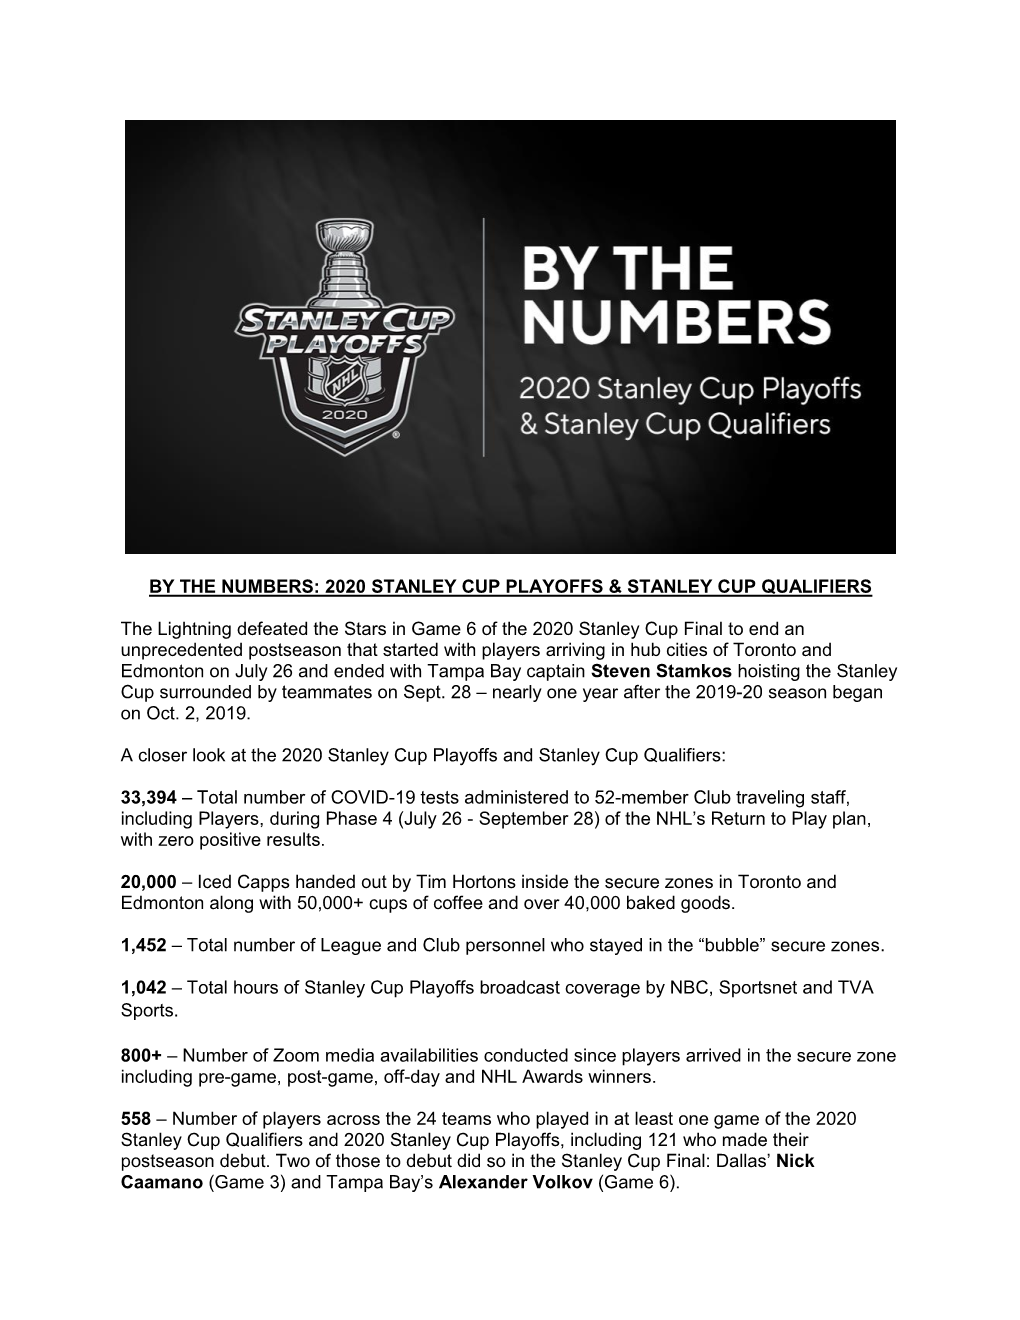 By the Numbers: 2020 Stanley Cup Playoffs & Stanley Cup Qualifiers